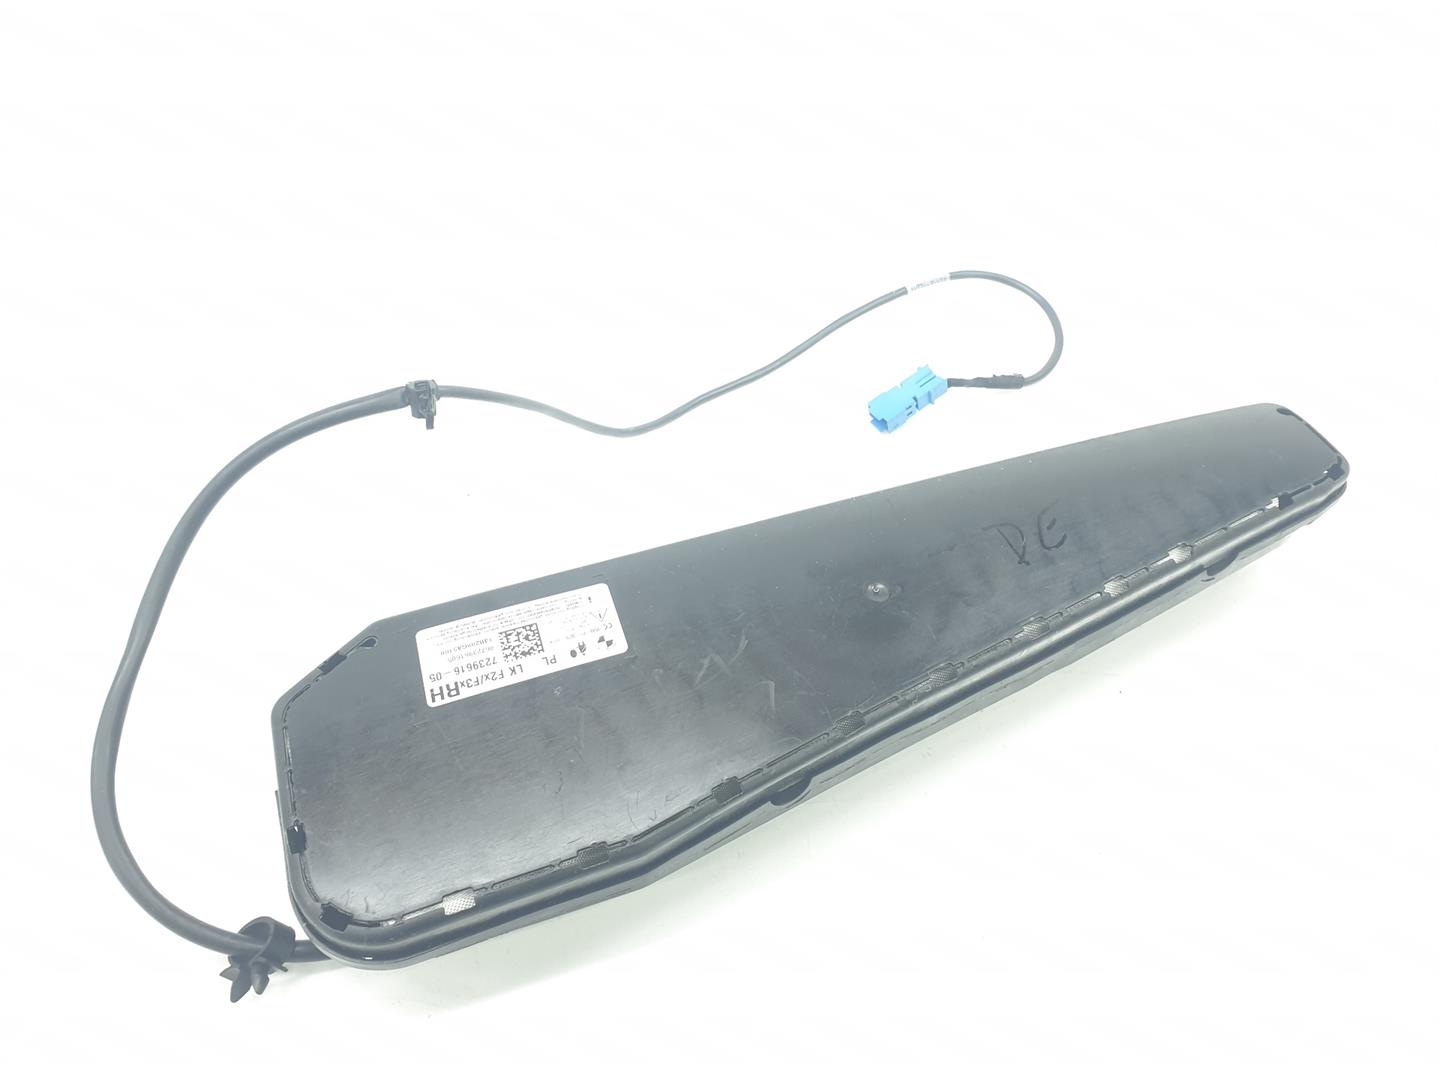 BMW 3 Series F30/F31 (2011-2020) Front Right Door Airbag SRS 7239616, 72127239616, 1141CB 24452094